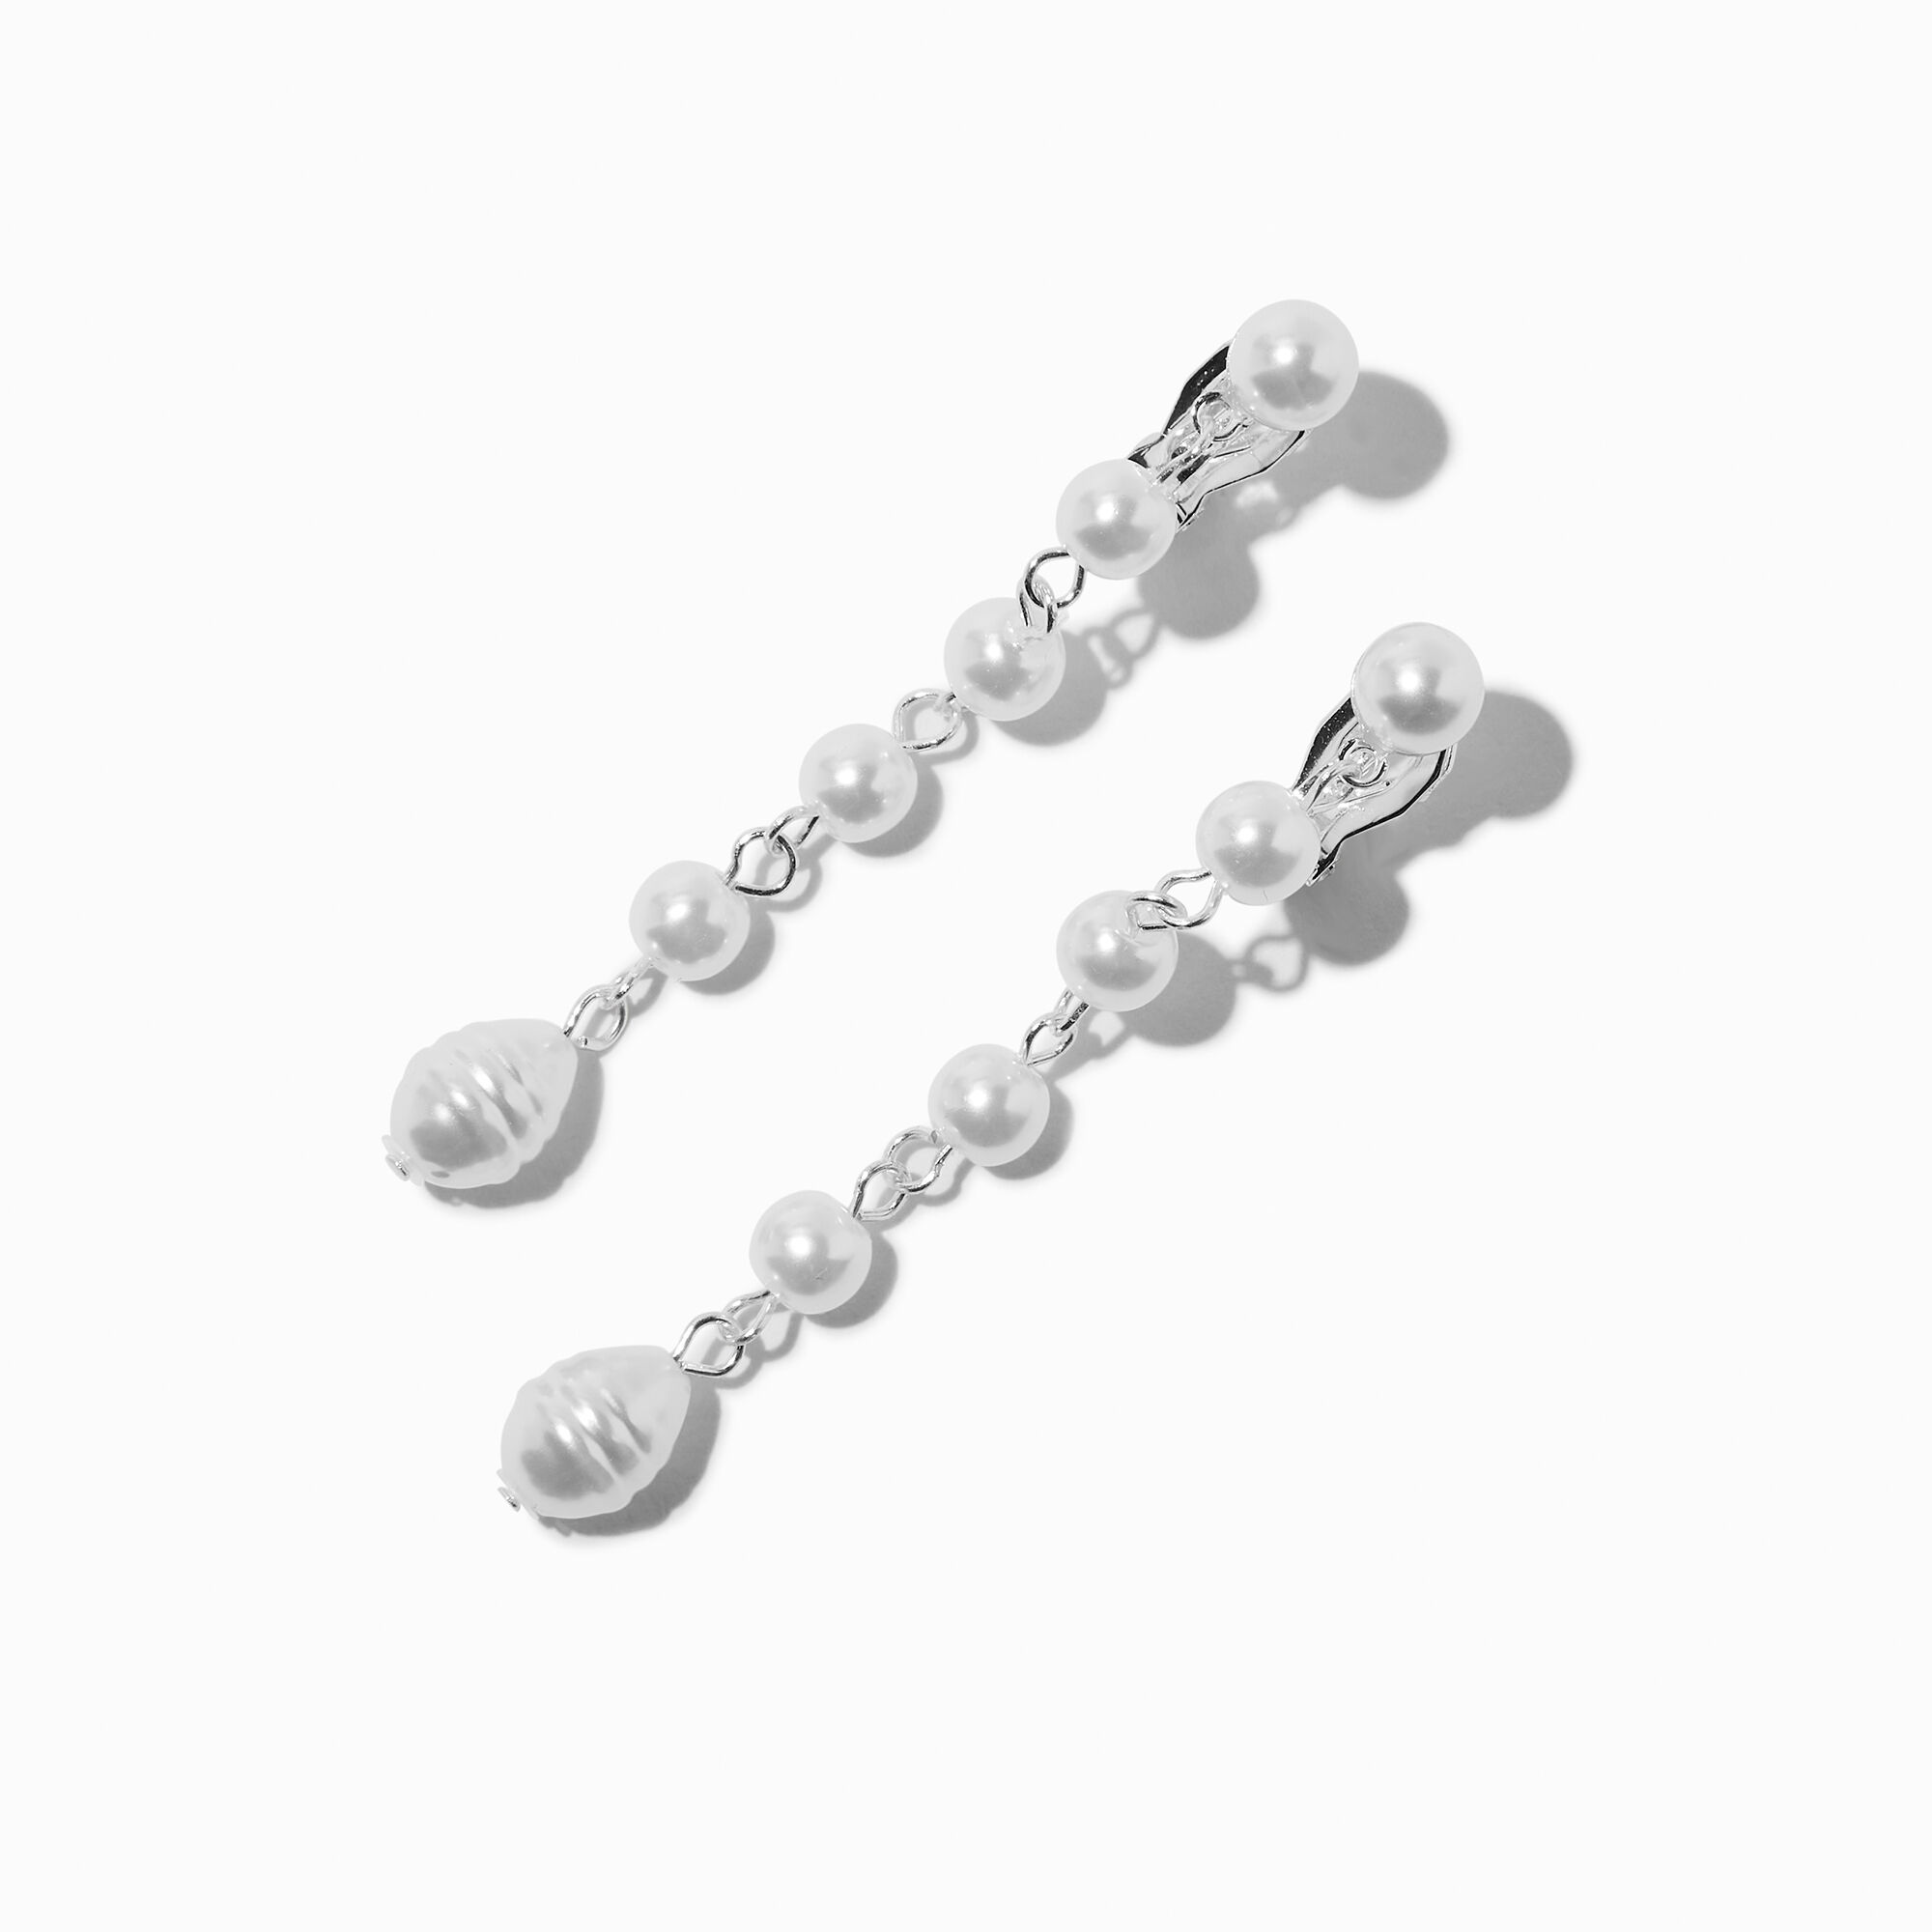 View Claires Tone Pearl Linear 2 ClipOn Drop Earrings Silver information